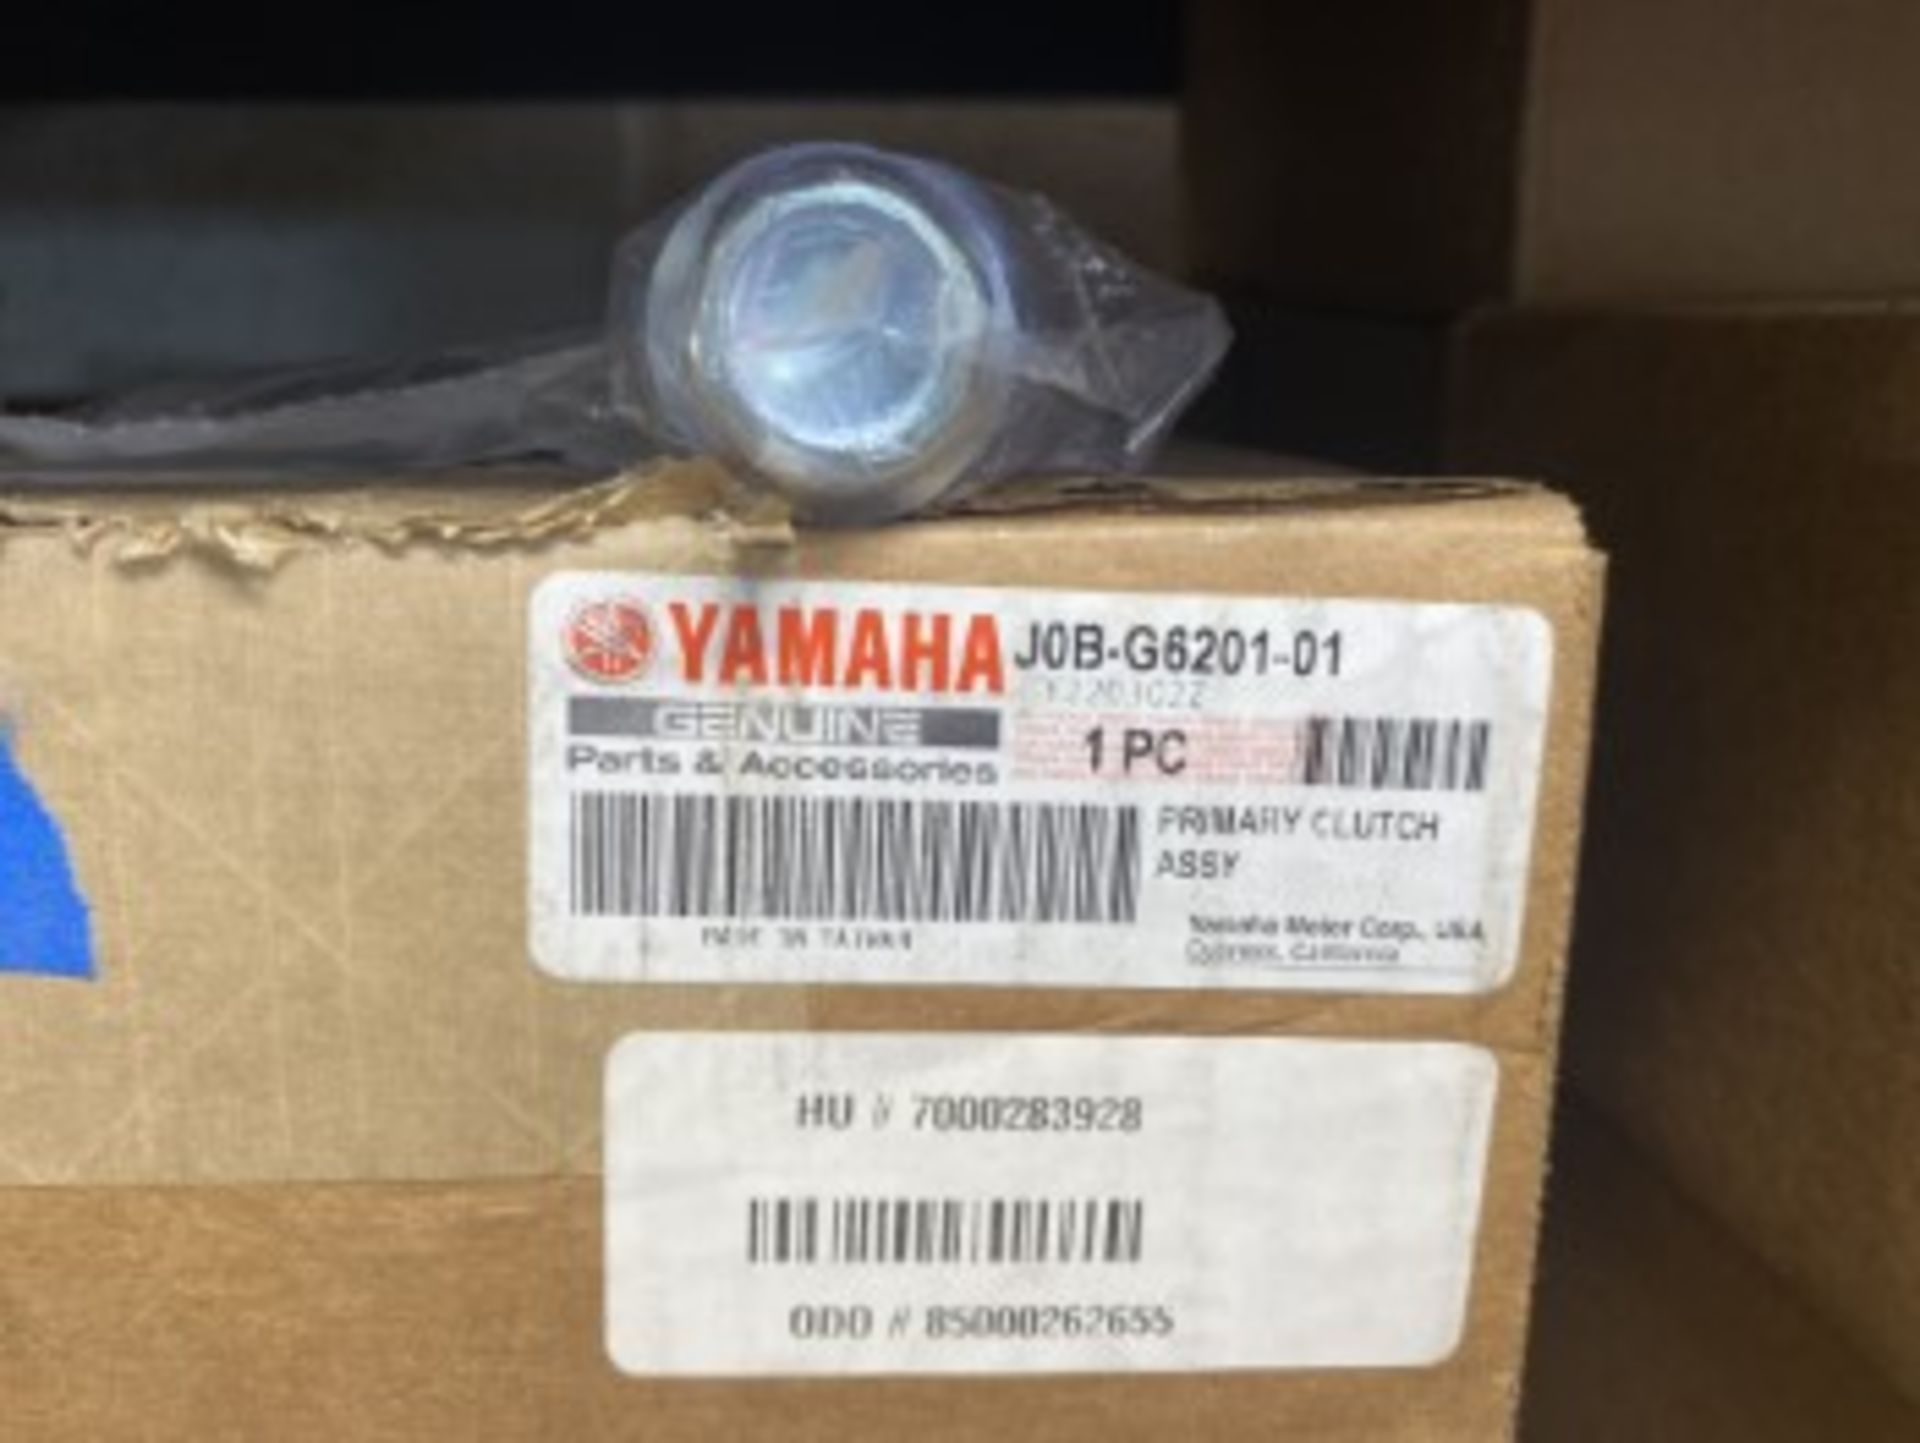 YAMAHA PRIMARY CLUTCH ASSEMBLY (NEW) - Image 2 of 3